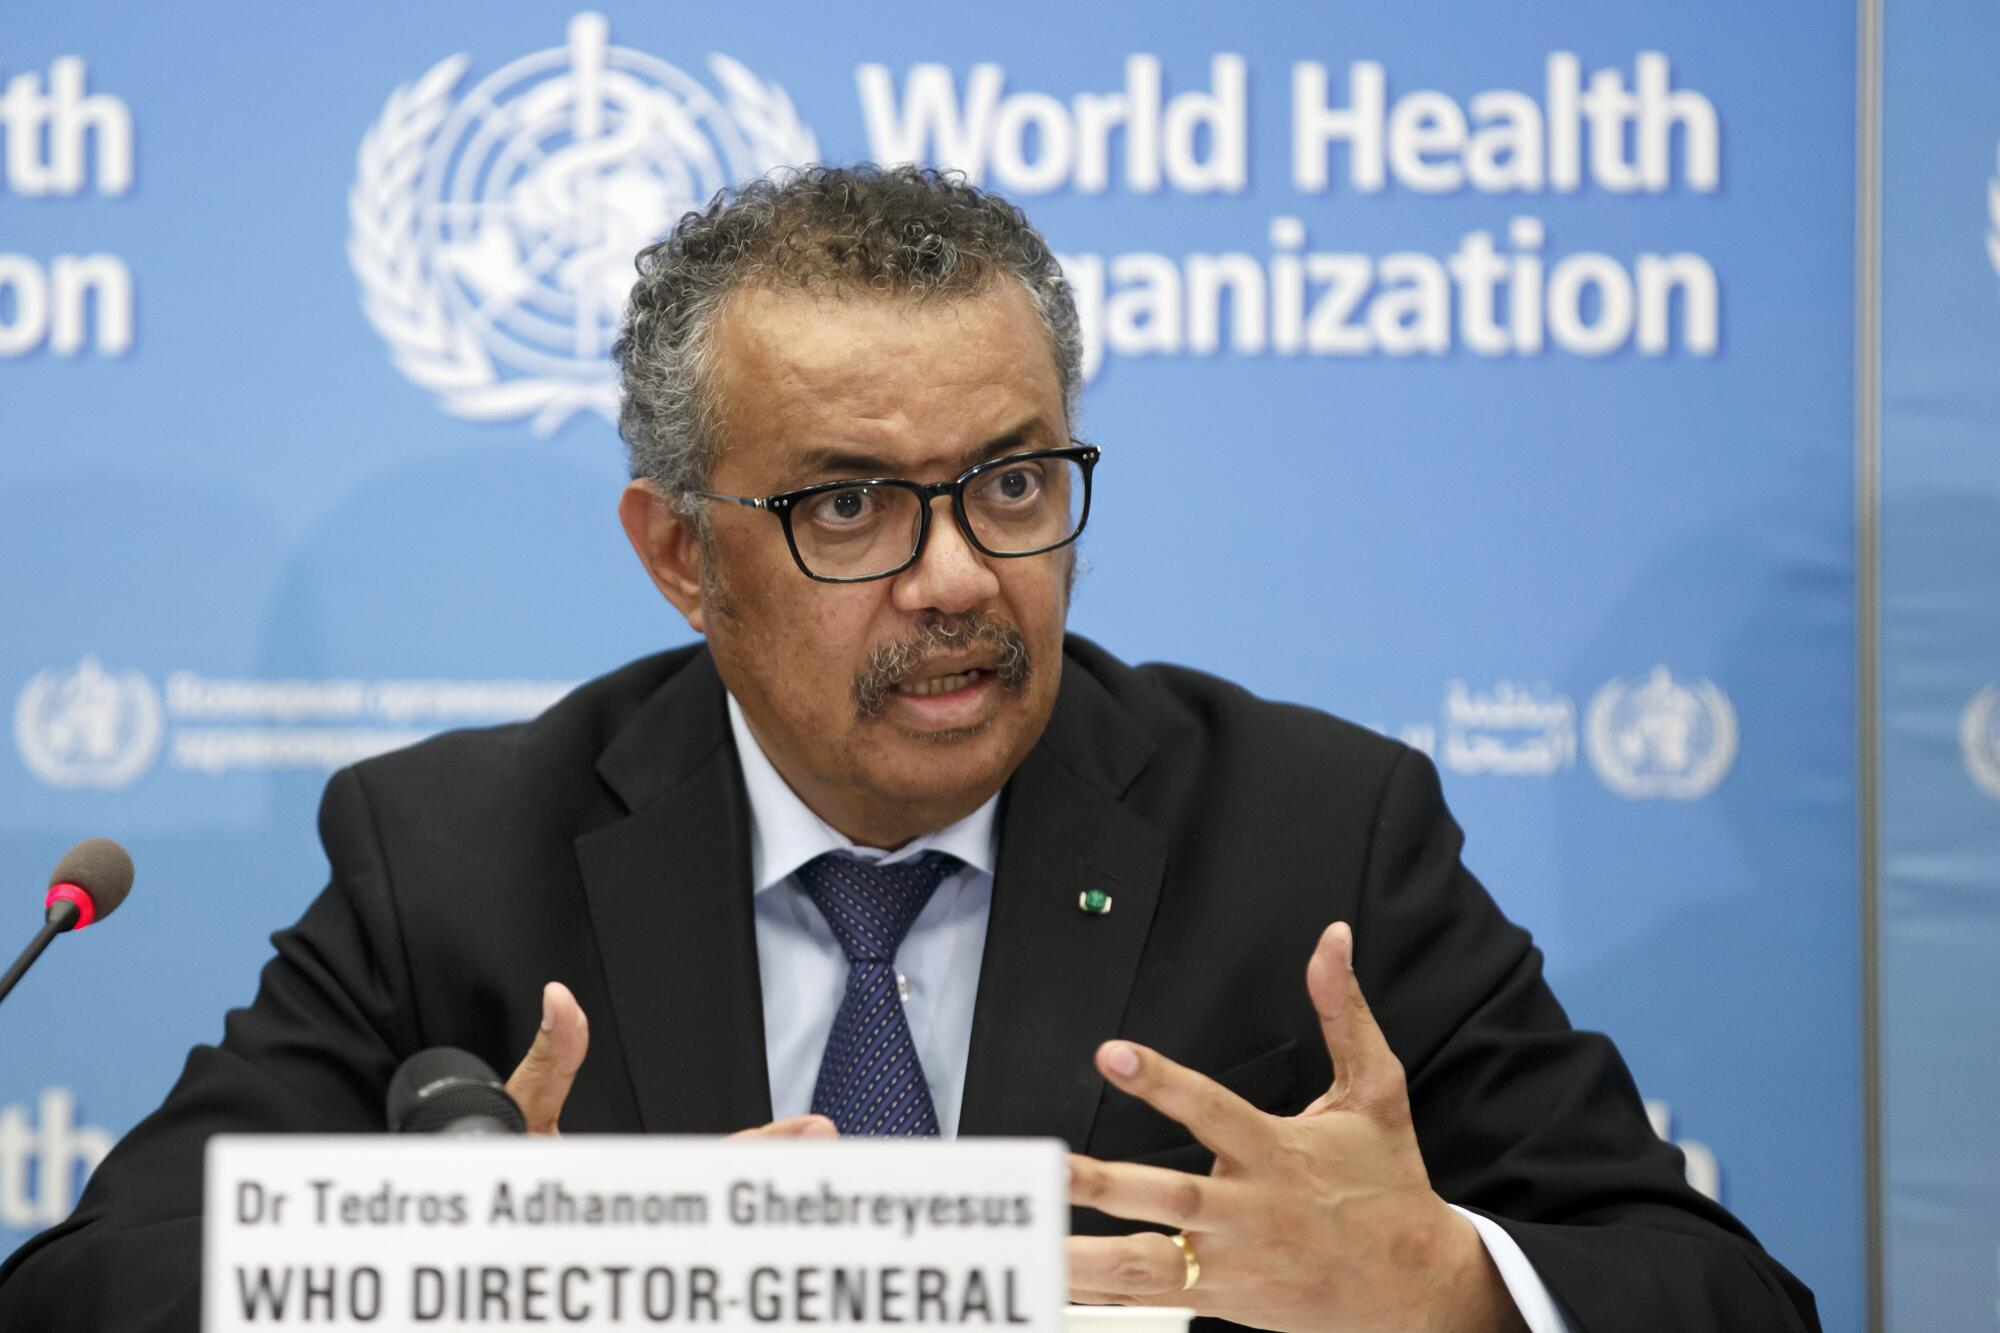 Tedros Adhanom Ghebreyesus, director-general of the World Health Organization, discusses COVID-19 at a news conference.